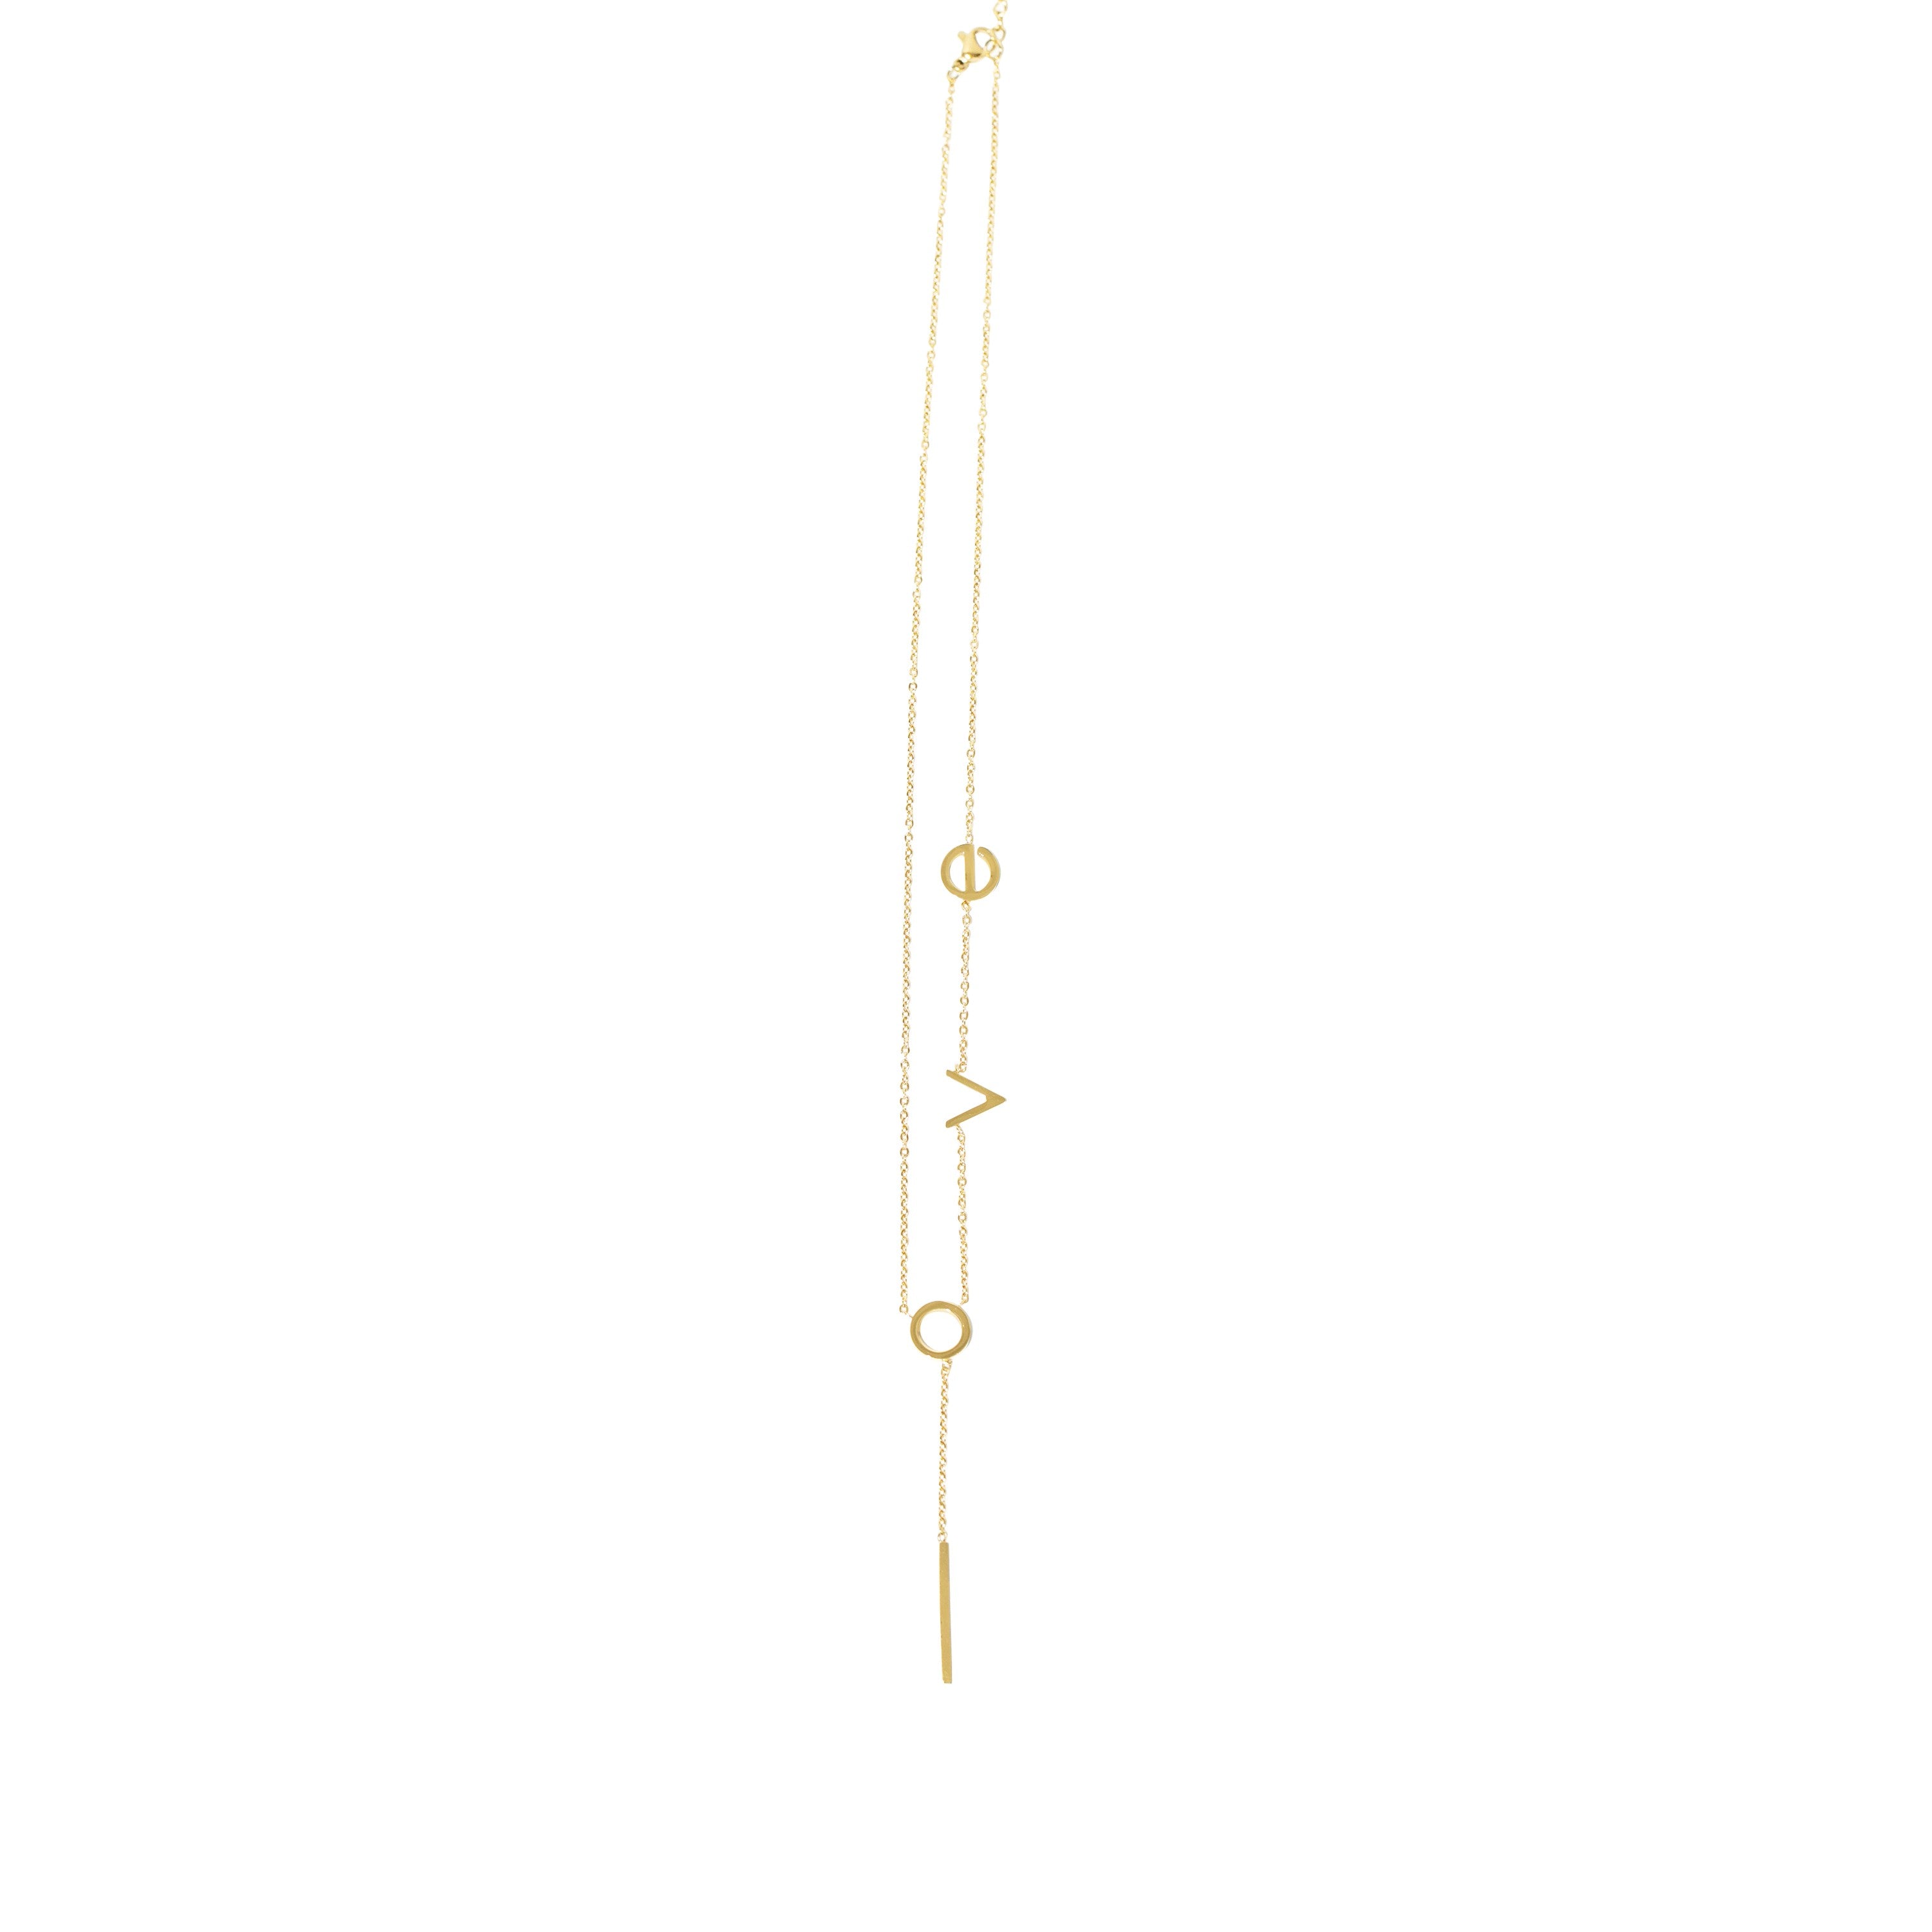 Stainless Steel  Gold Tone Lariat Style Bar Necklace